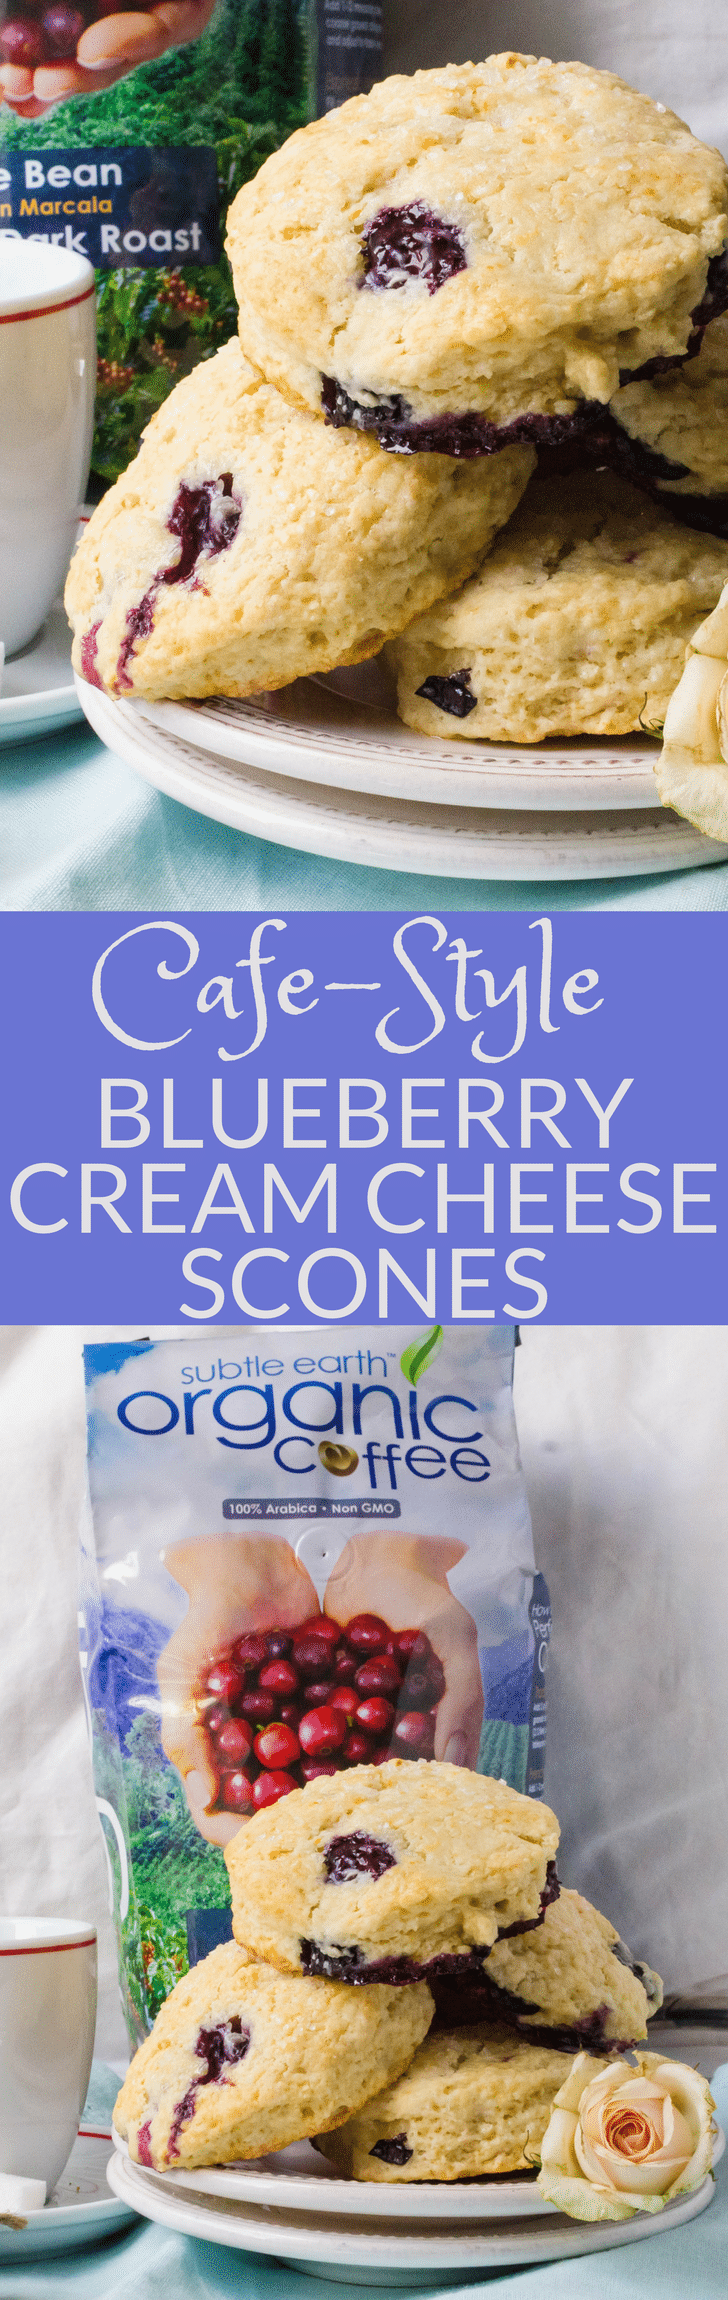 #ad If you love homemade scones, then Blueberry Cream Cheese Scones are for you! These baked scones have butter, cream cheese and fresh berries for the best blueberry scones for weekend brunches or celebrations. This easy baked scones recipe feeds a crowd. #scones #blueberryscones #creamcheesescones #bakedscones #brunch #breakfast #sconesrecipe #howtomakescones #blueberries #biscuits #mothersdayrecipe #4thofjulyrecipe #coffeehouse #coffee #cafedonpablo #subtleearthorganiccoffee #donpablocoffee 